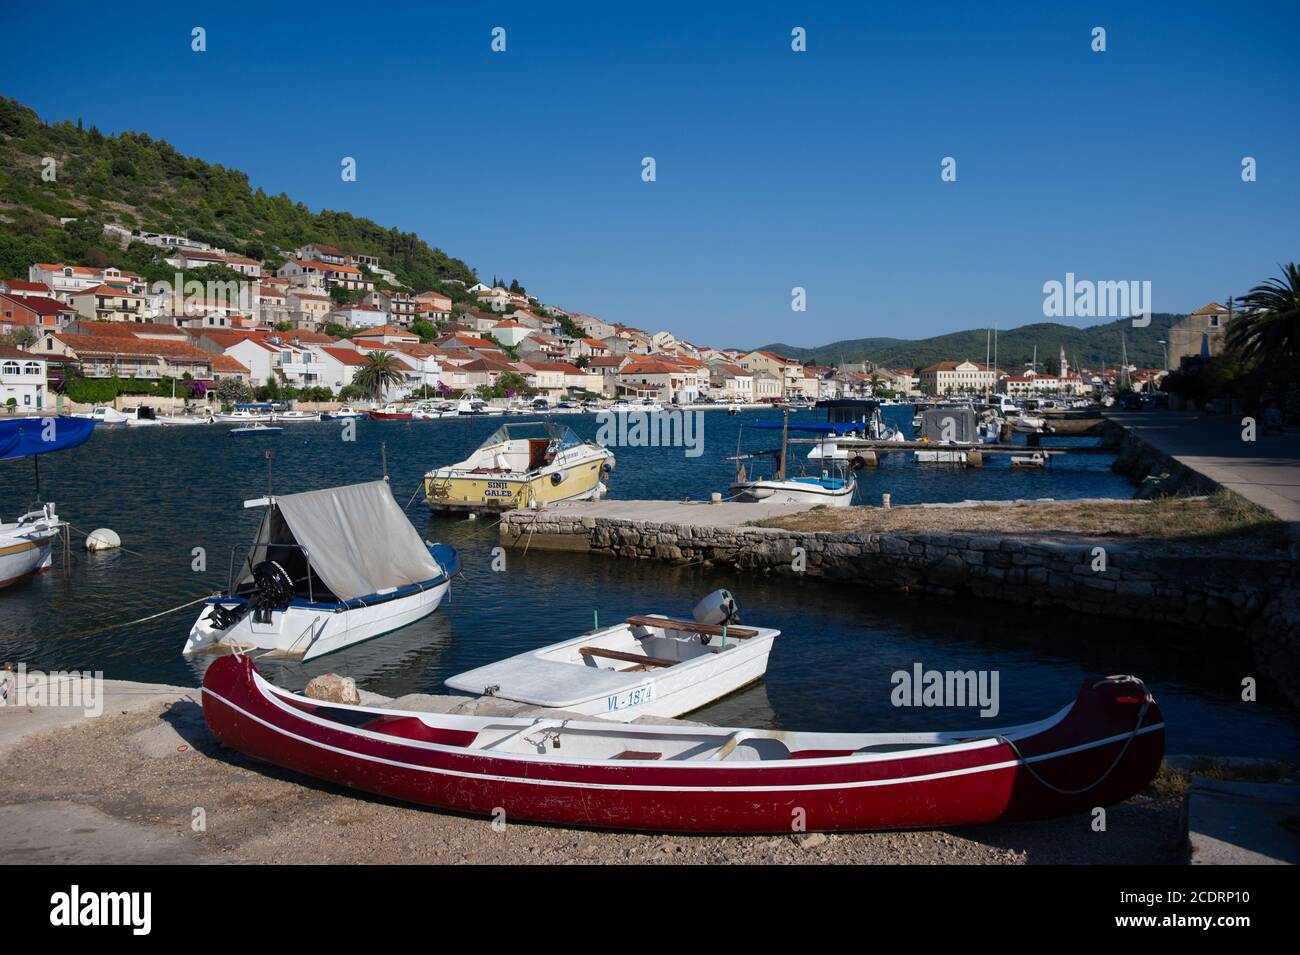 Small recreational boats at rest in a sleepy Adriatic port village. Stock Photo